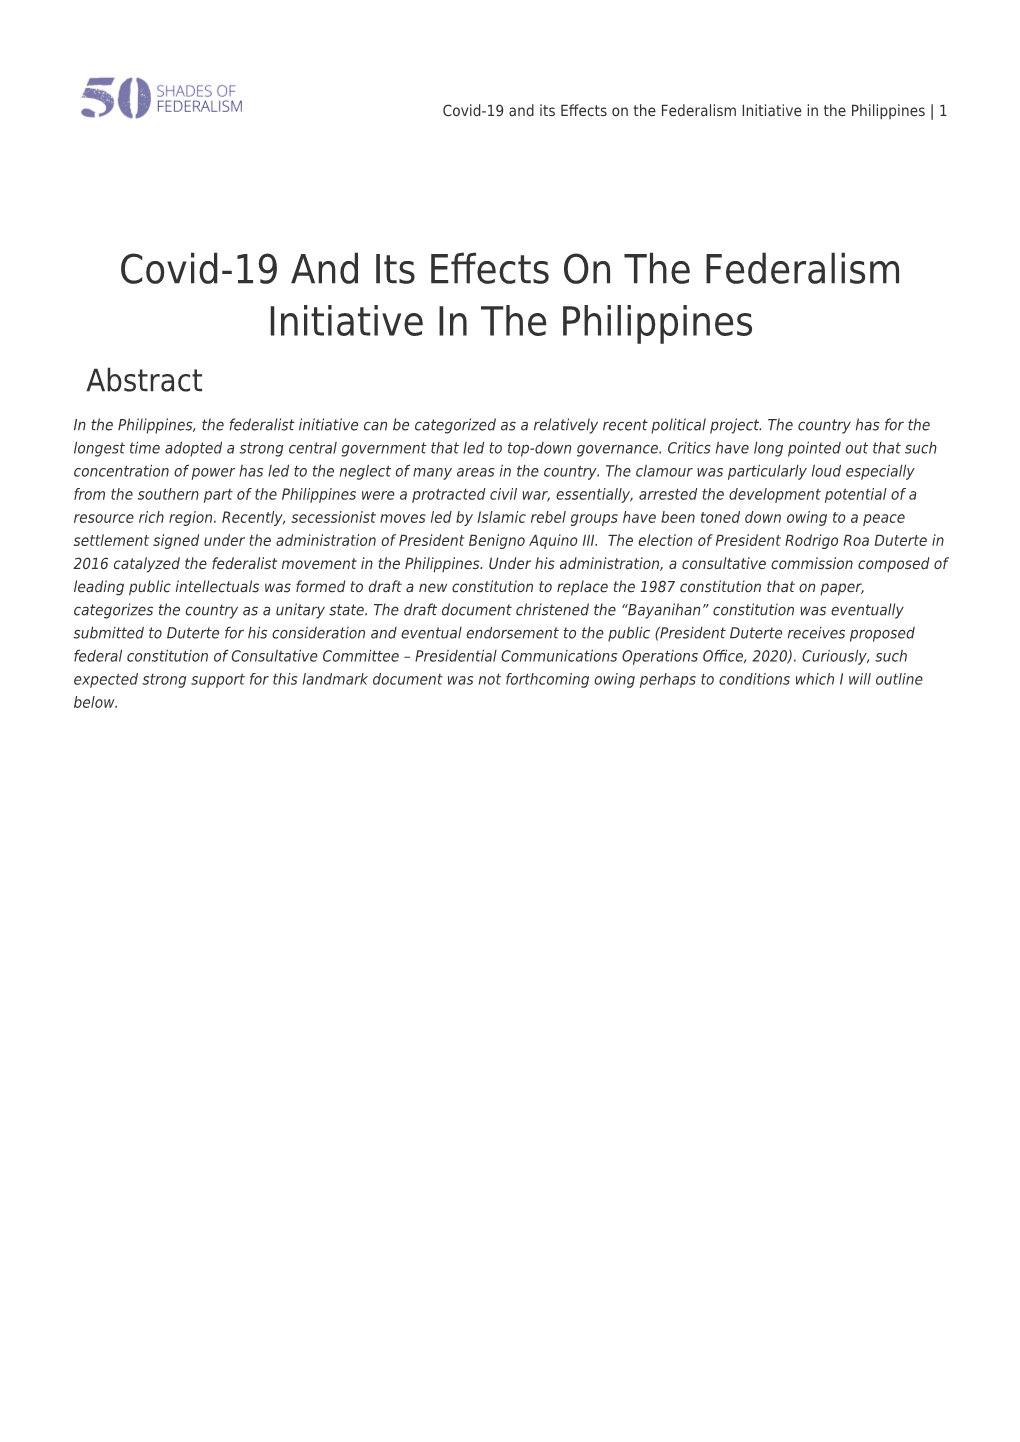 Covid-19 and Its Effects on the Federalism Initiative in the Philippines